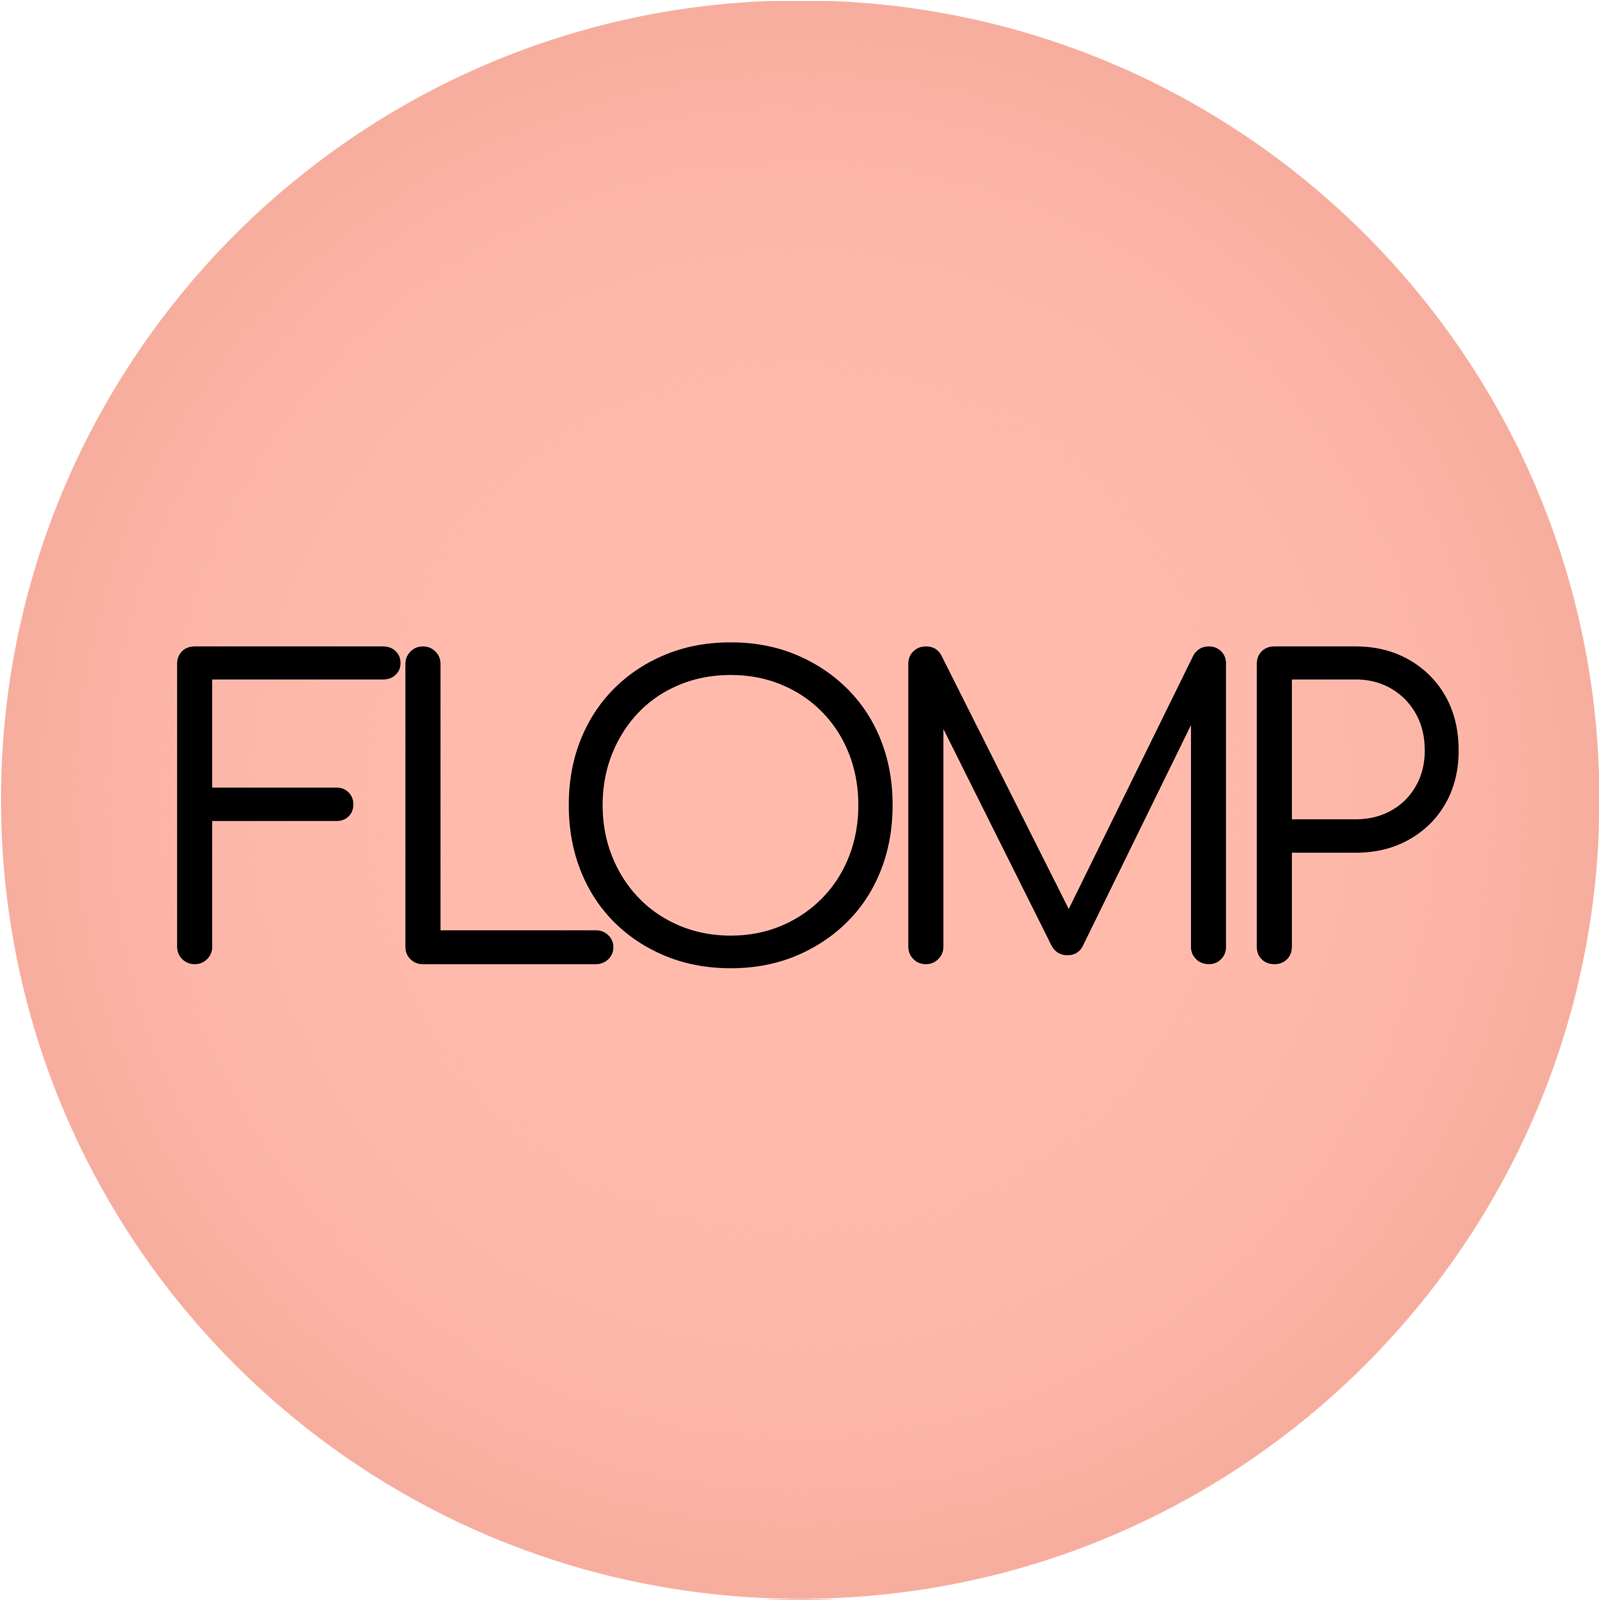 The Flomp logo - a pink circle with the word FLOMP written in it.